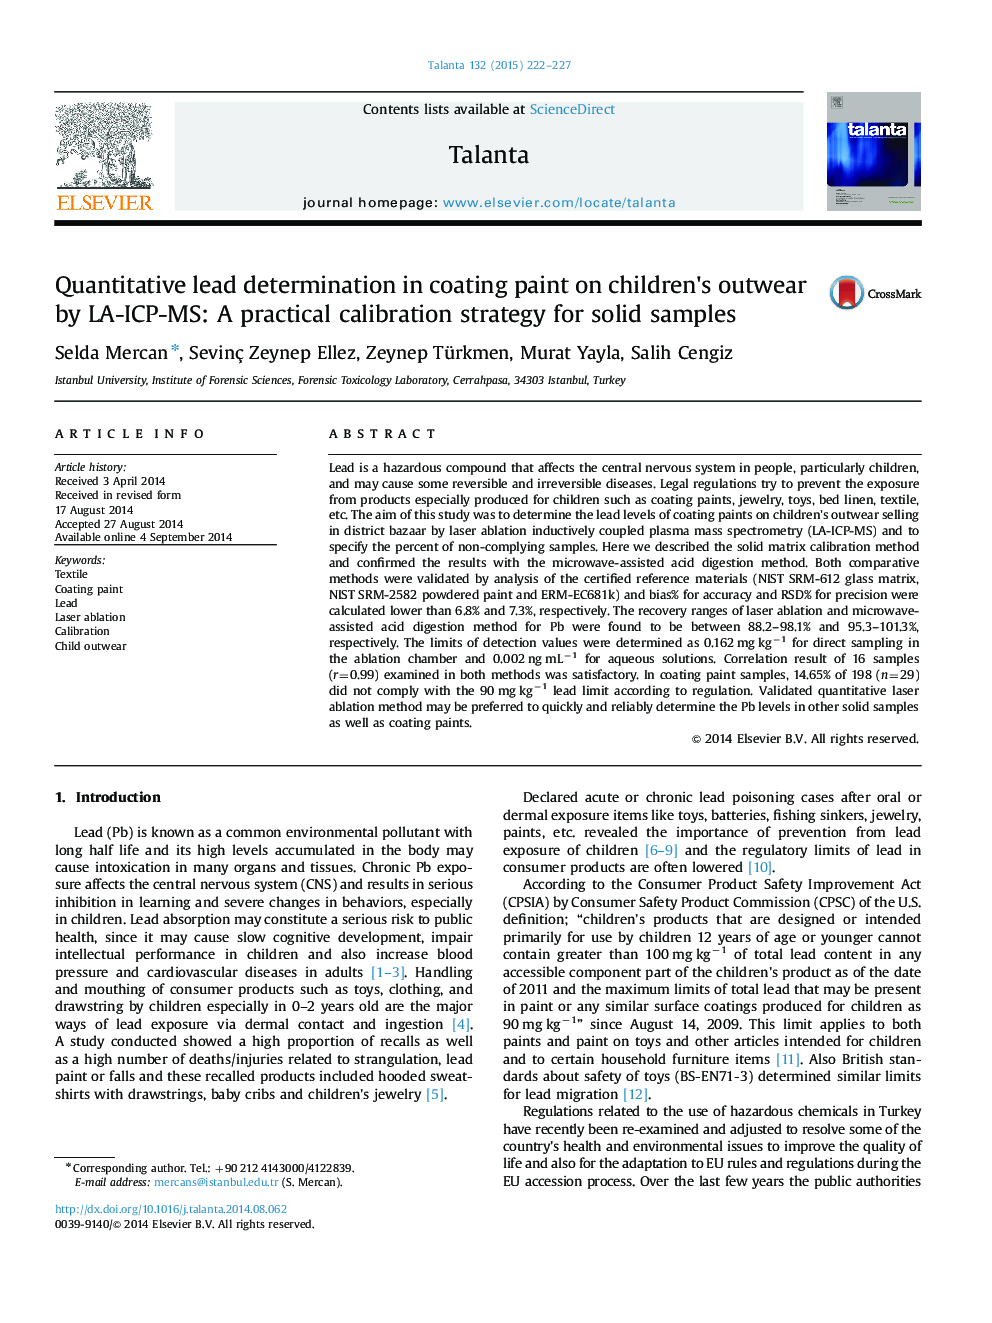 Quantitative lead determination in coating paint on children׳s outwear by LA-ICP-MS: A practical calibration strategy for solid samples